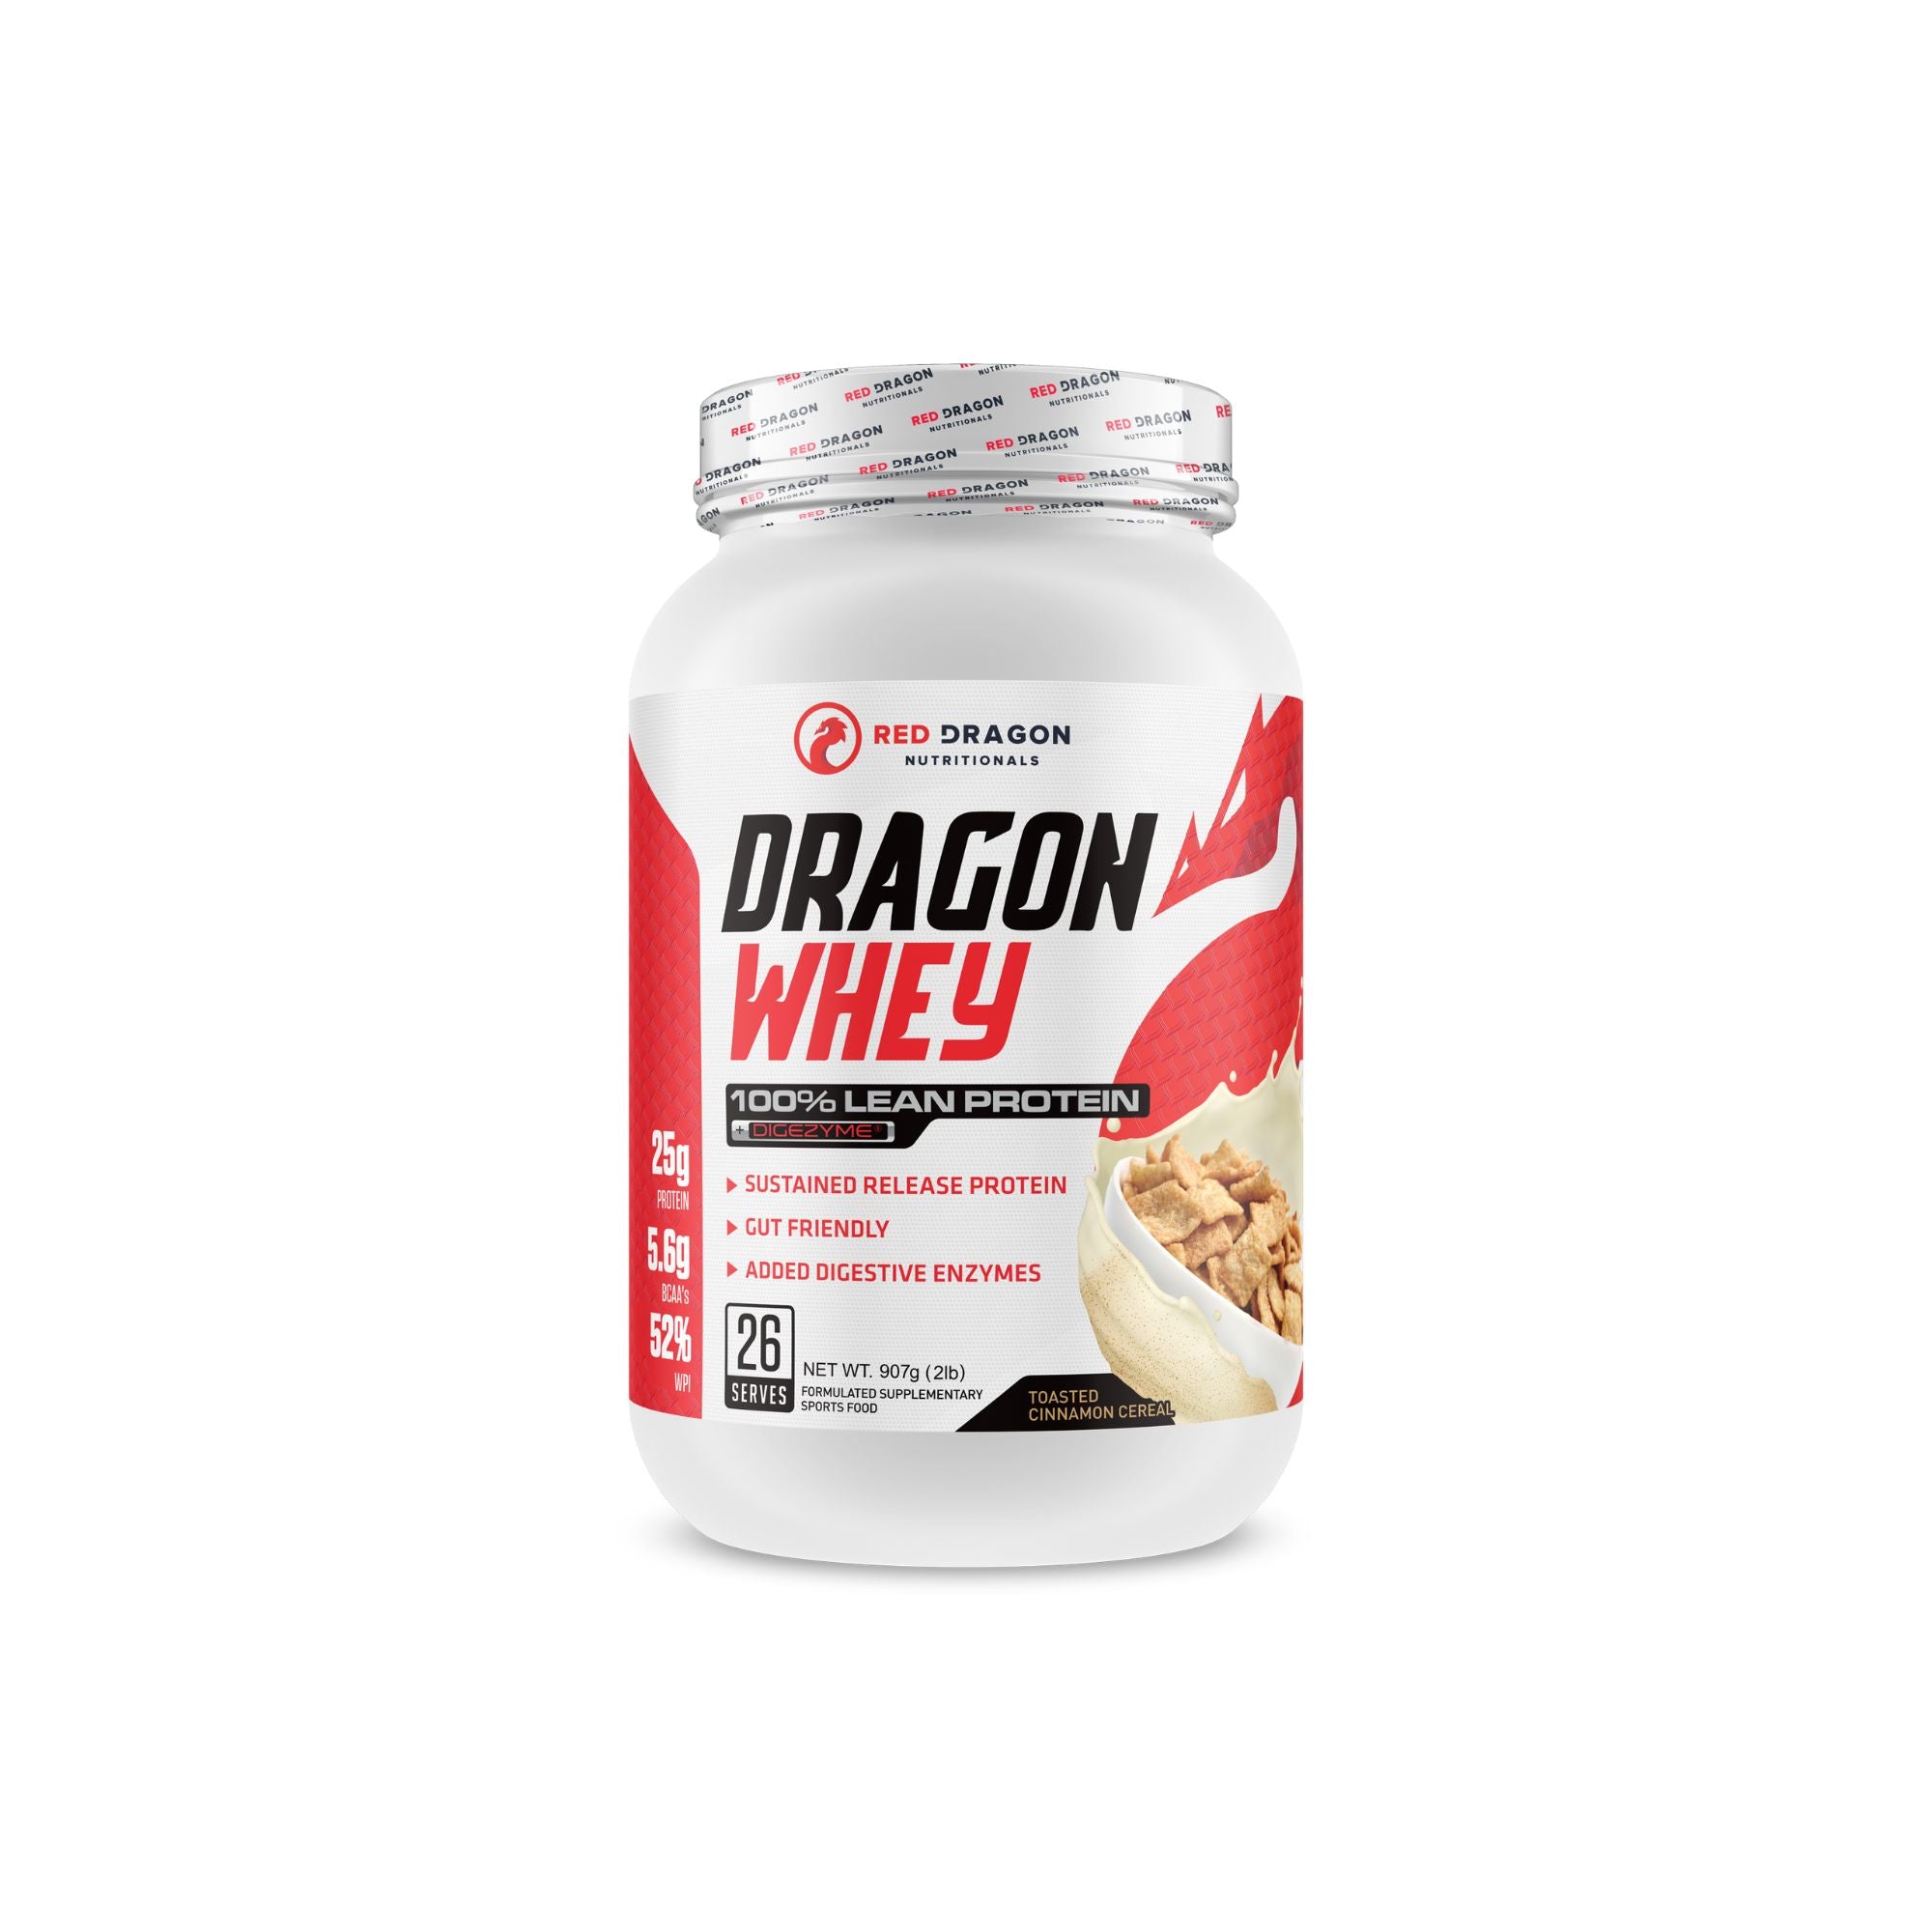 Red Dragon Whey - Toasted Cinnamon Crunch